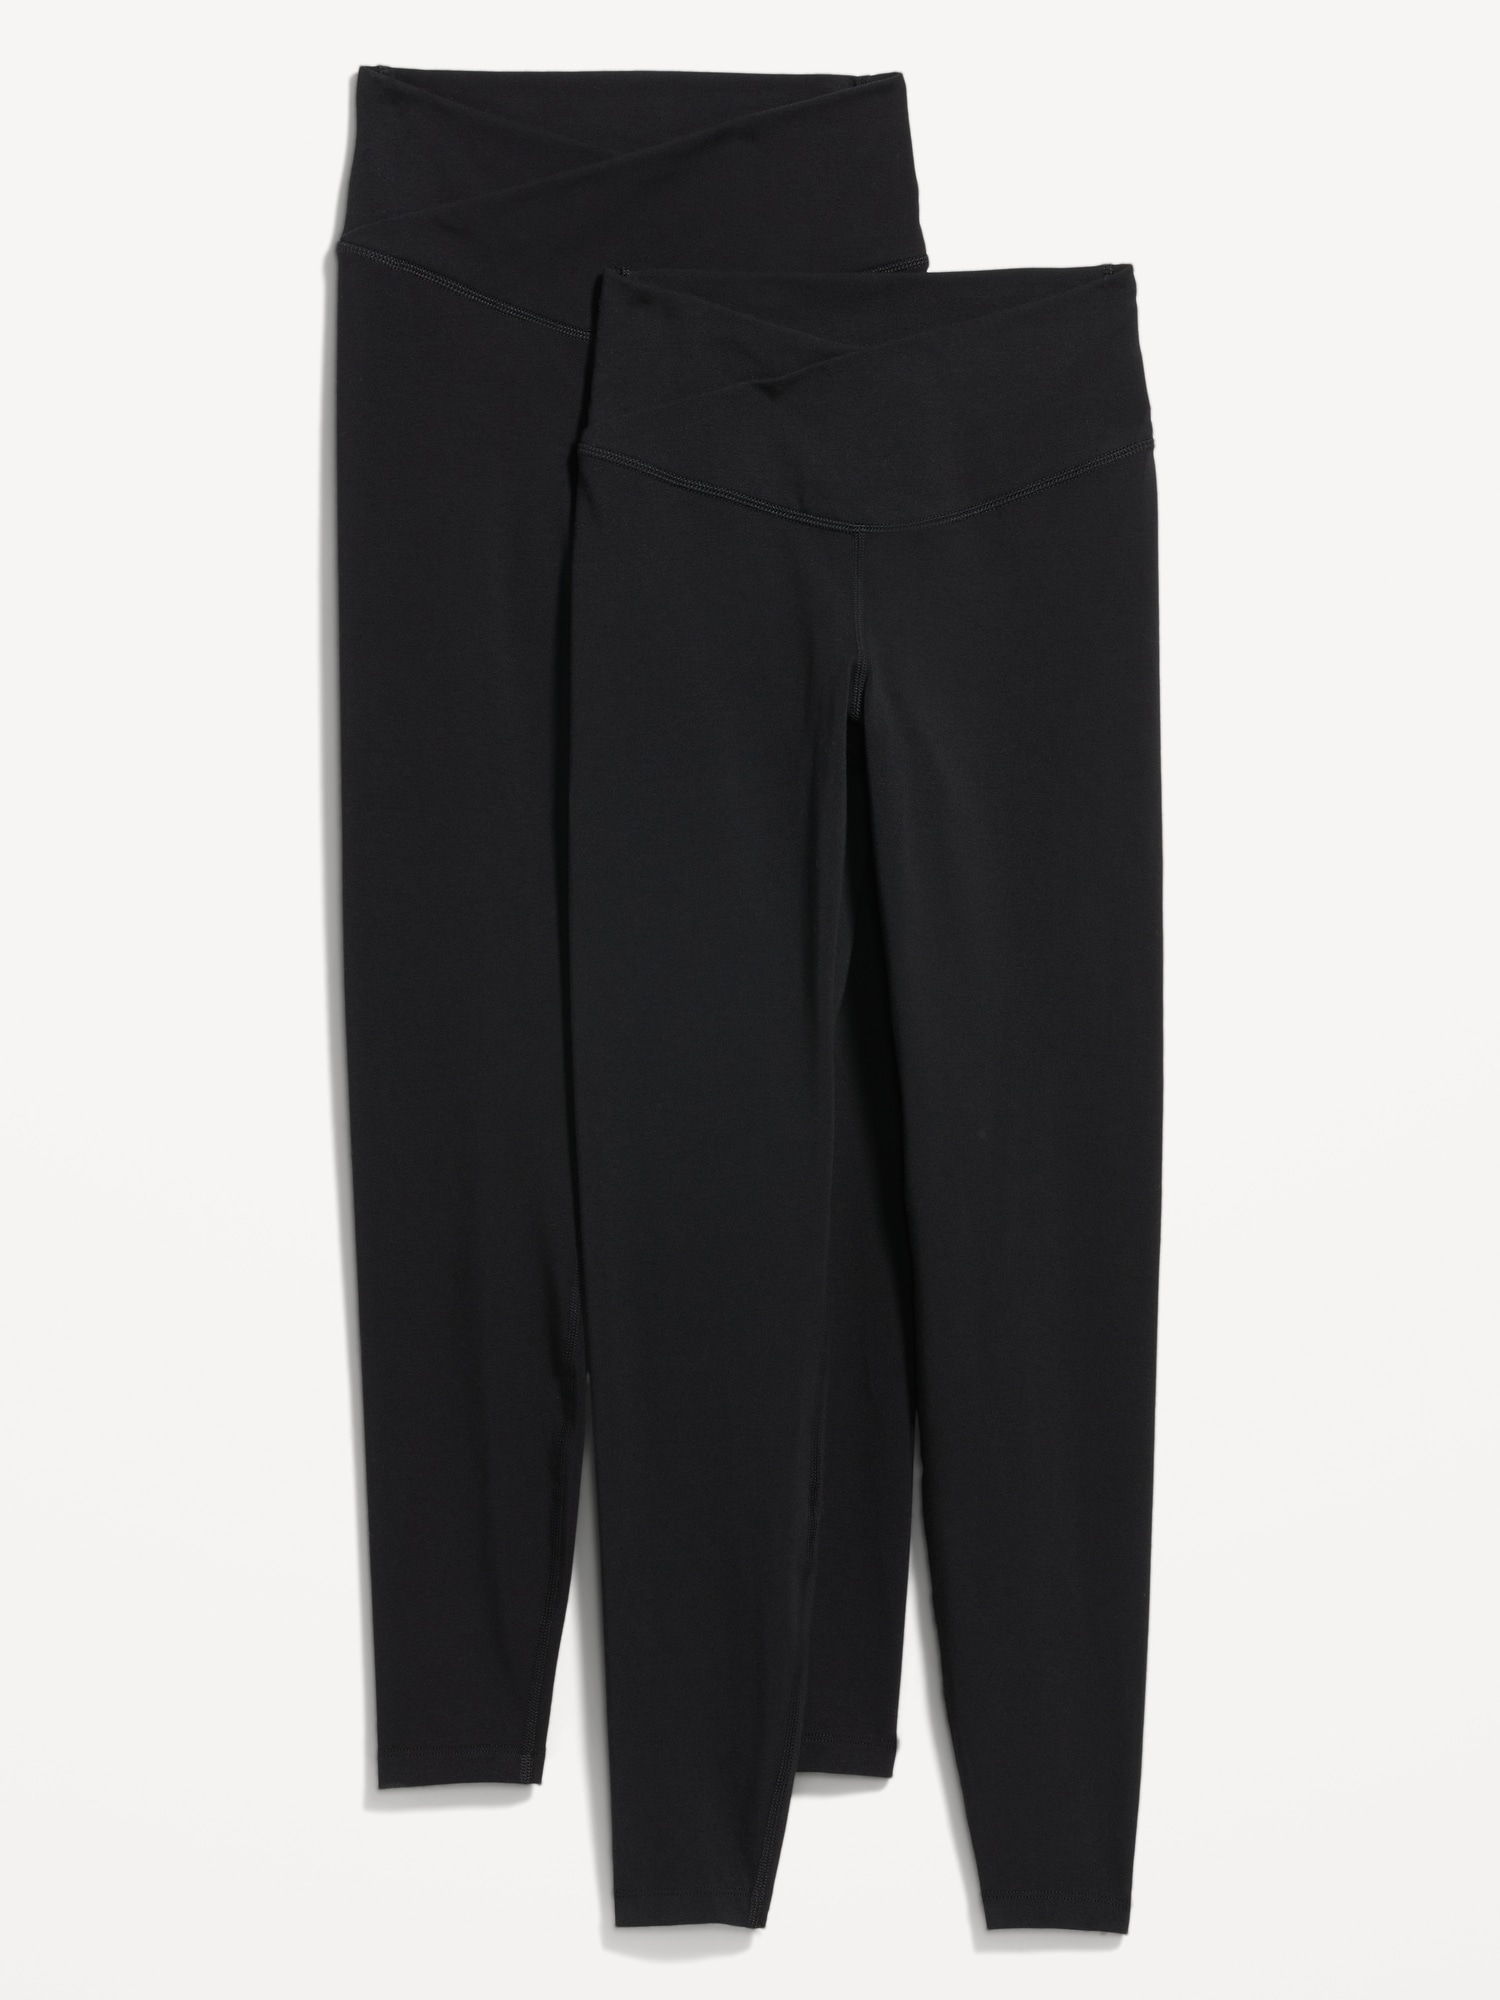 OLD NAVY ACTIVE Go Dry Leggings High Waisted Black Size Xs £7.89 - PicClick  UK